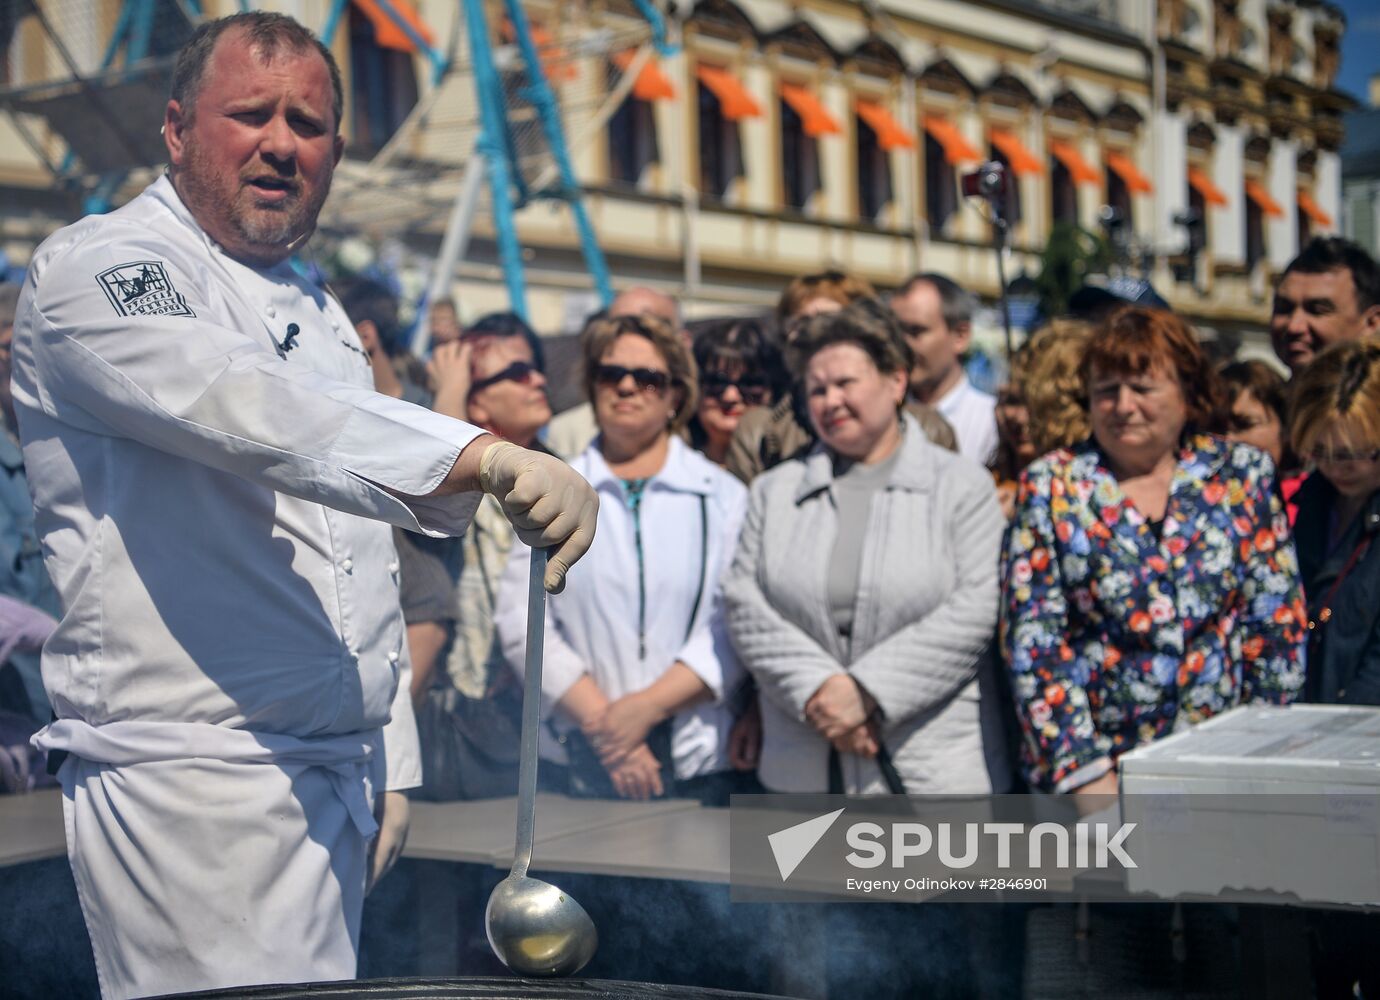 Largest bow of fish soup cooked at Fish Week Festival in Moscow